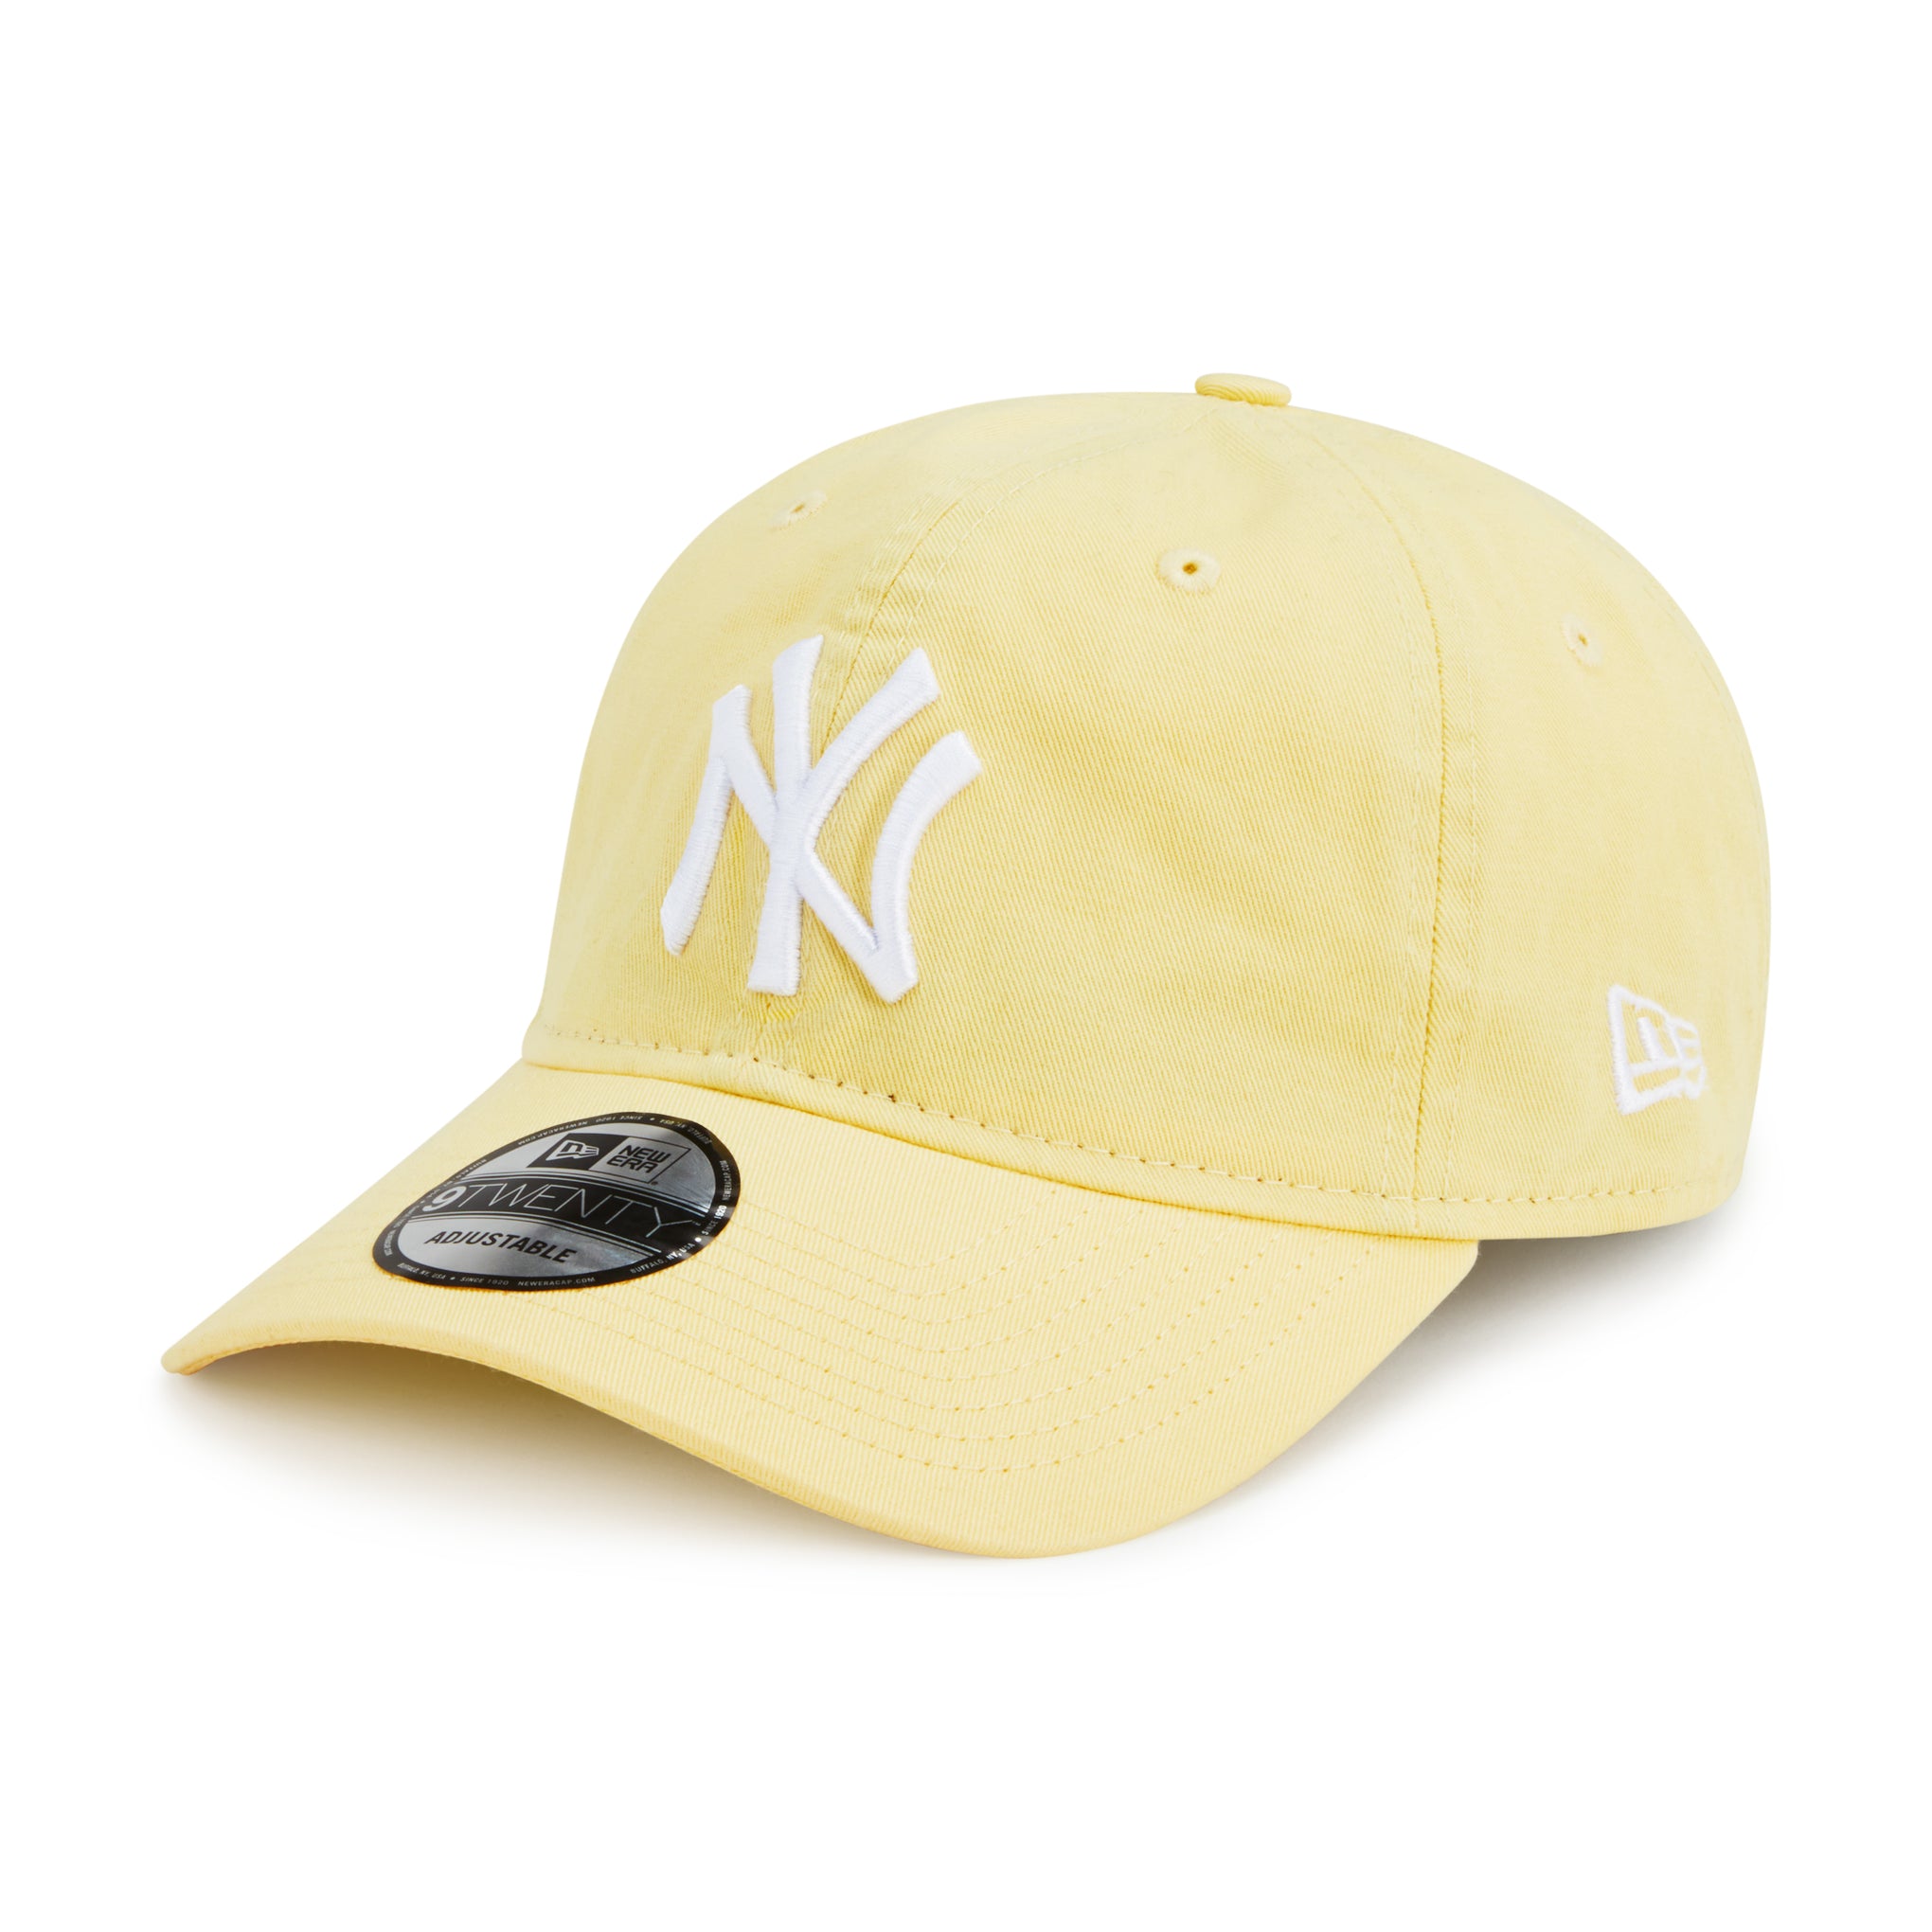 MLBshop.com - The newest New York Yankees hat - in collaboration